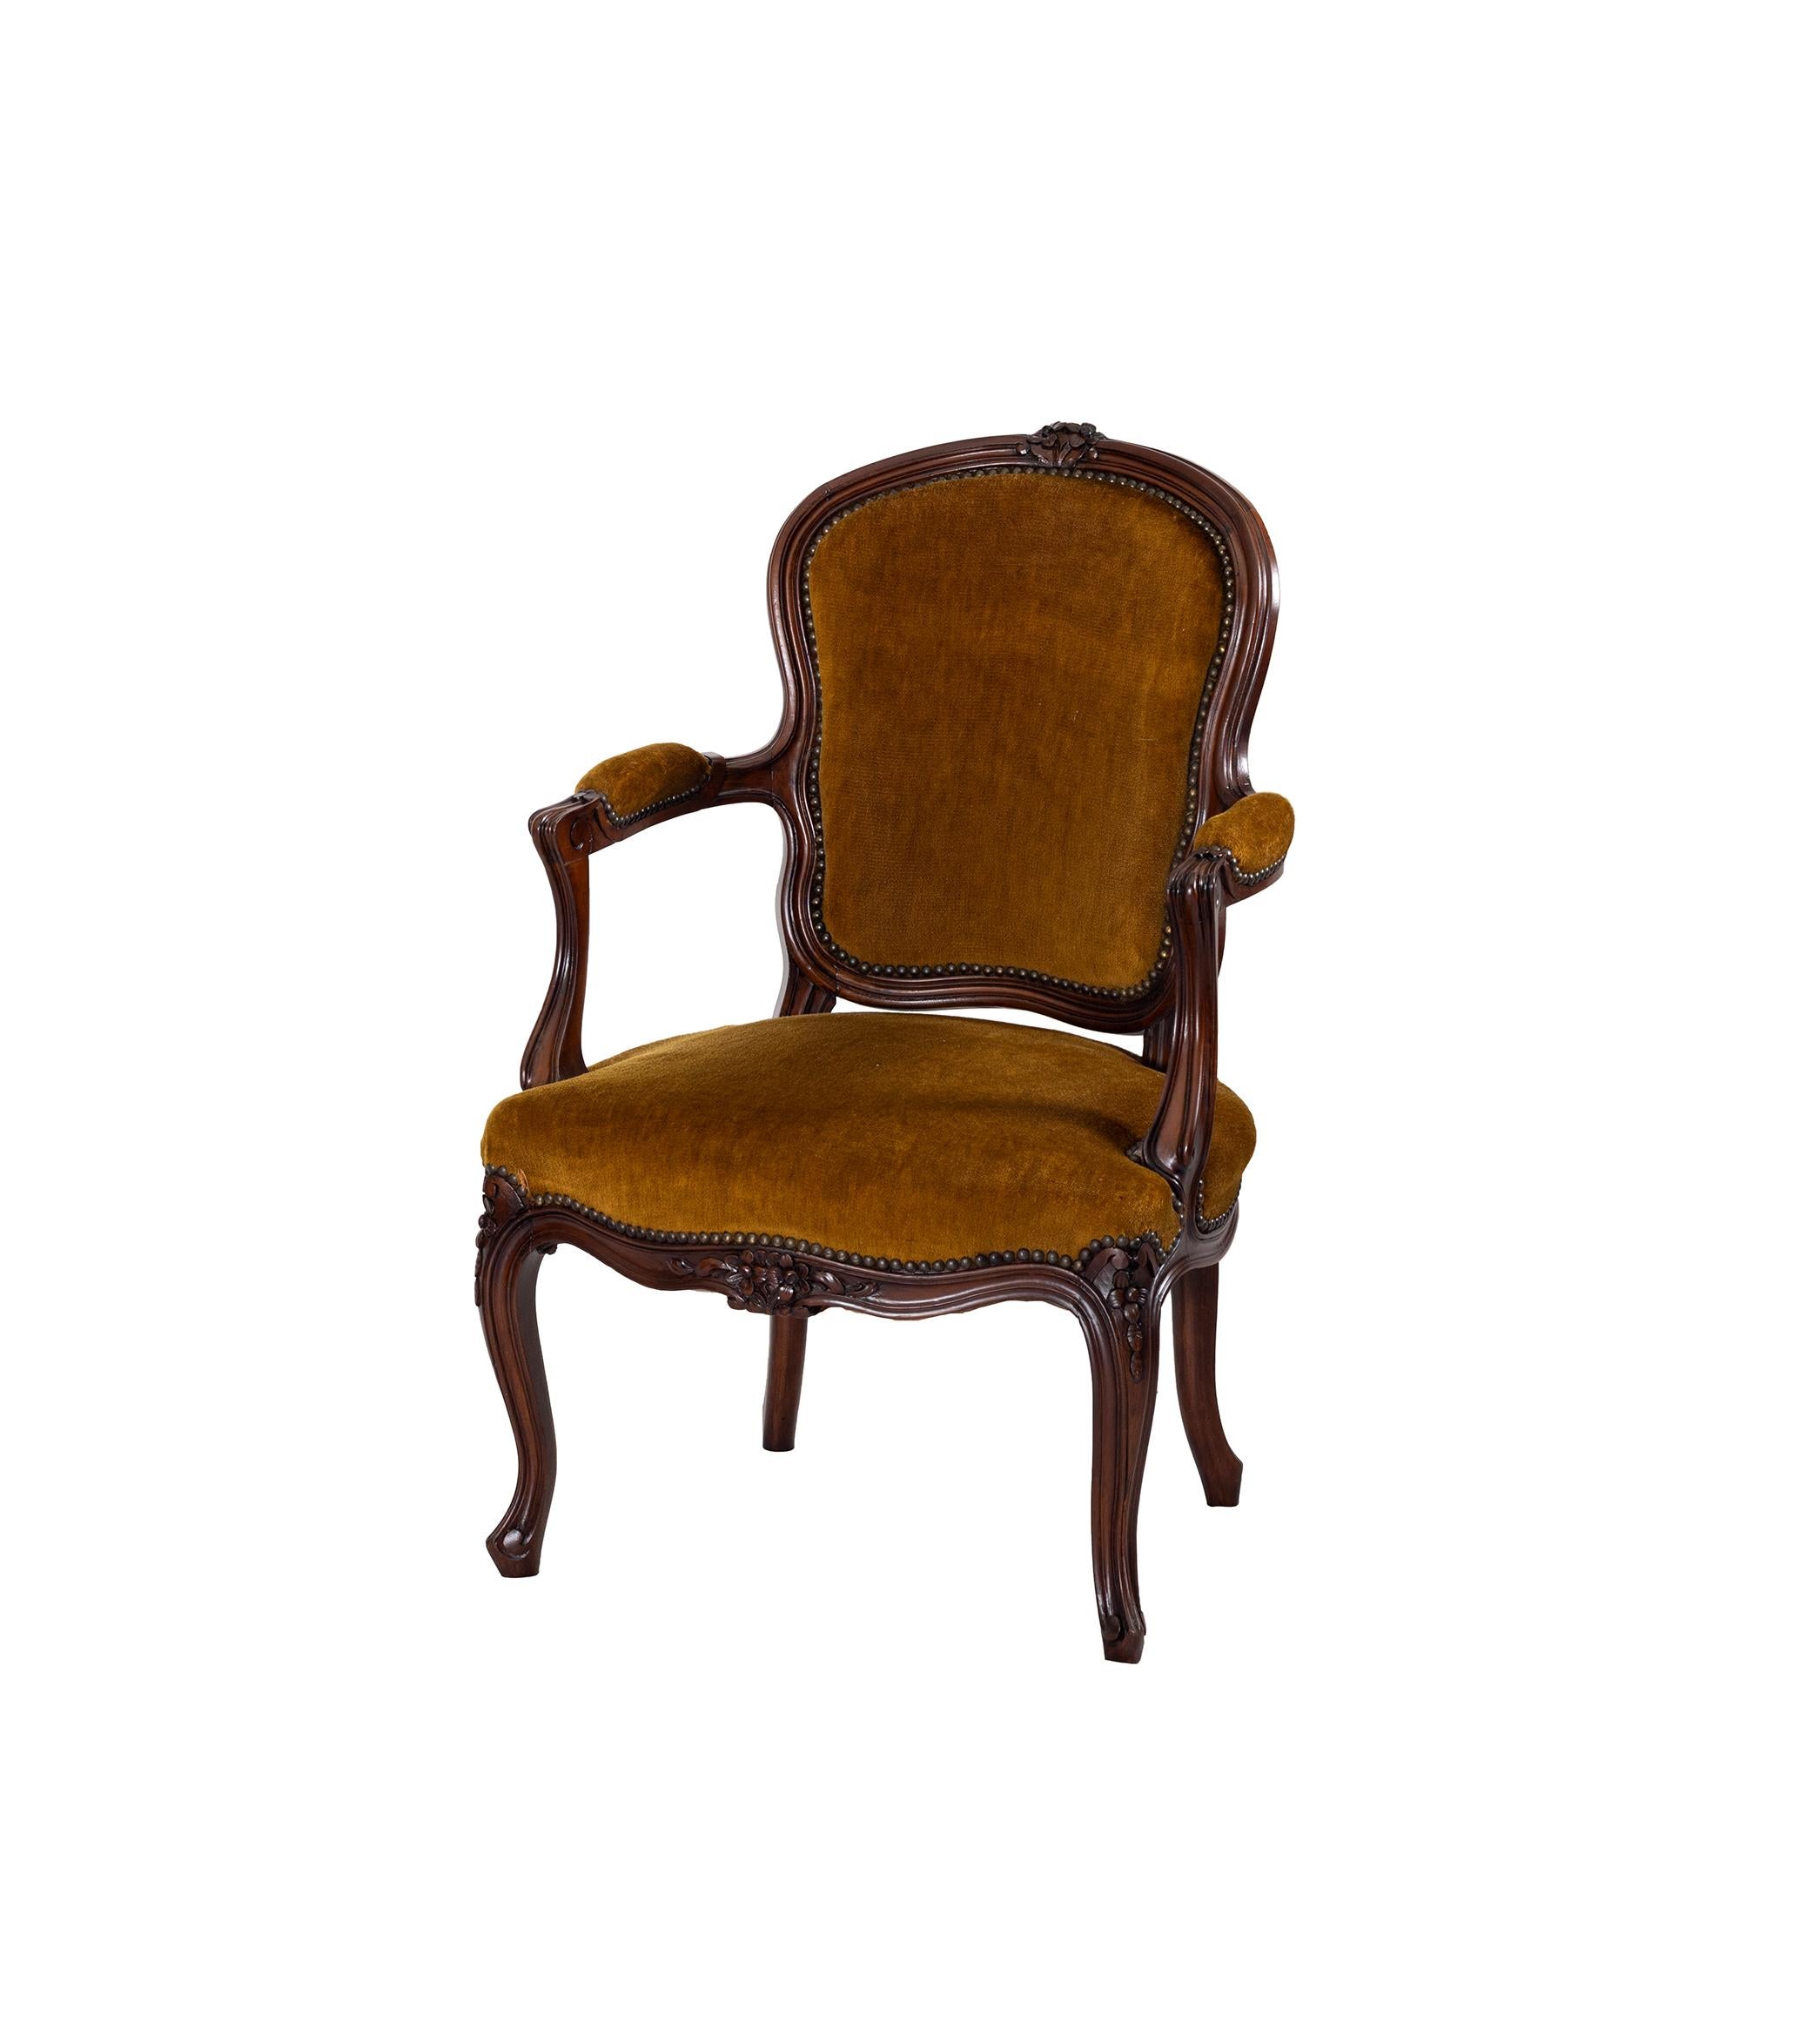 A pair of armchairs in fine Cuban mahogany wood, centred cut curls and floral carving, framed backrest, padded armrests supported in curved colueta, brown cushioned seat and backrest, wavy skirt supported on long legs finished with voluted feet.